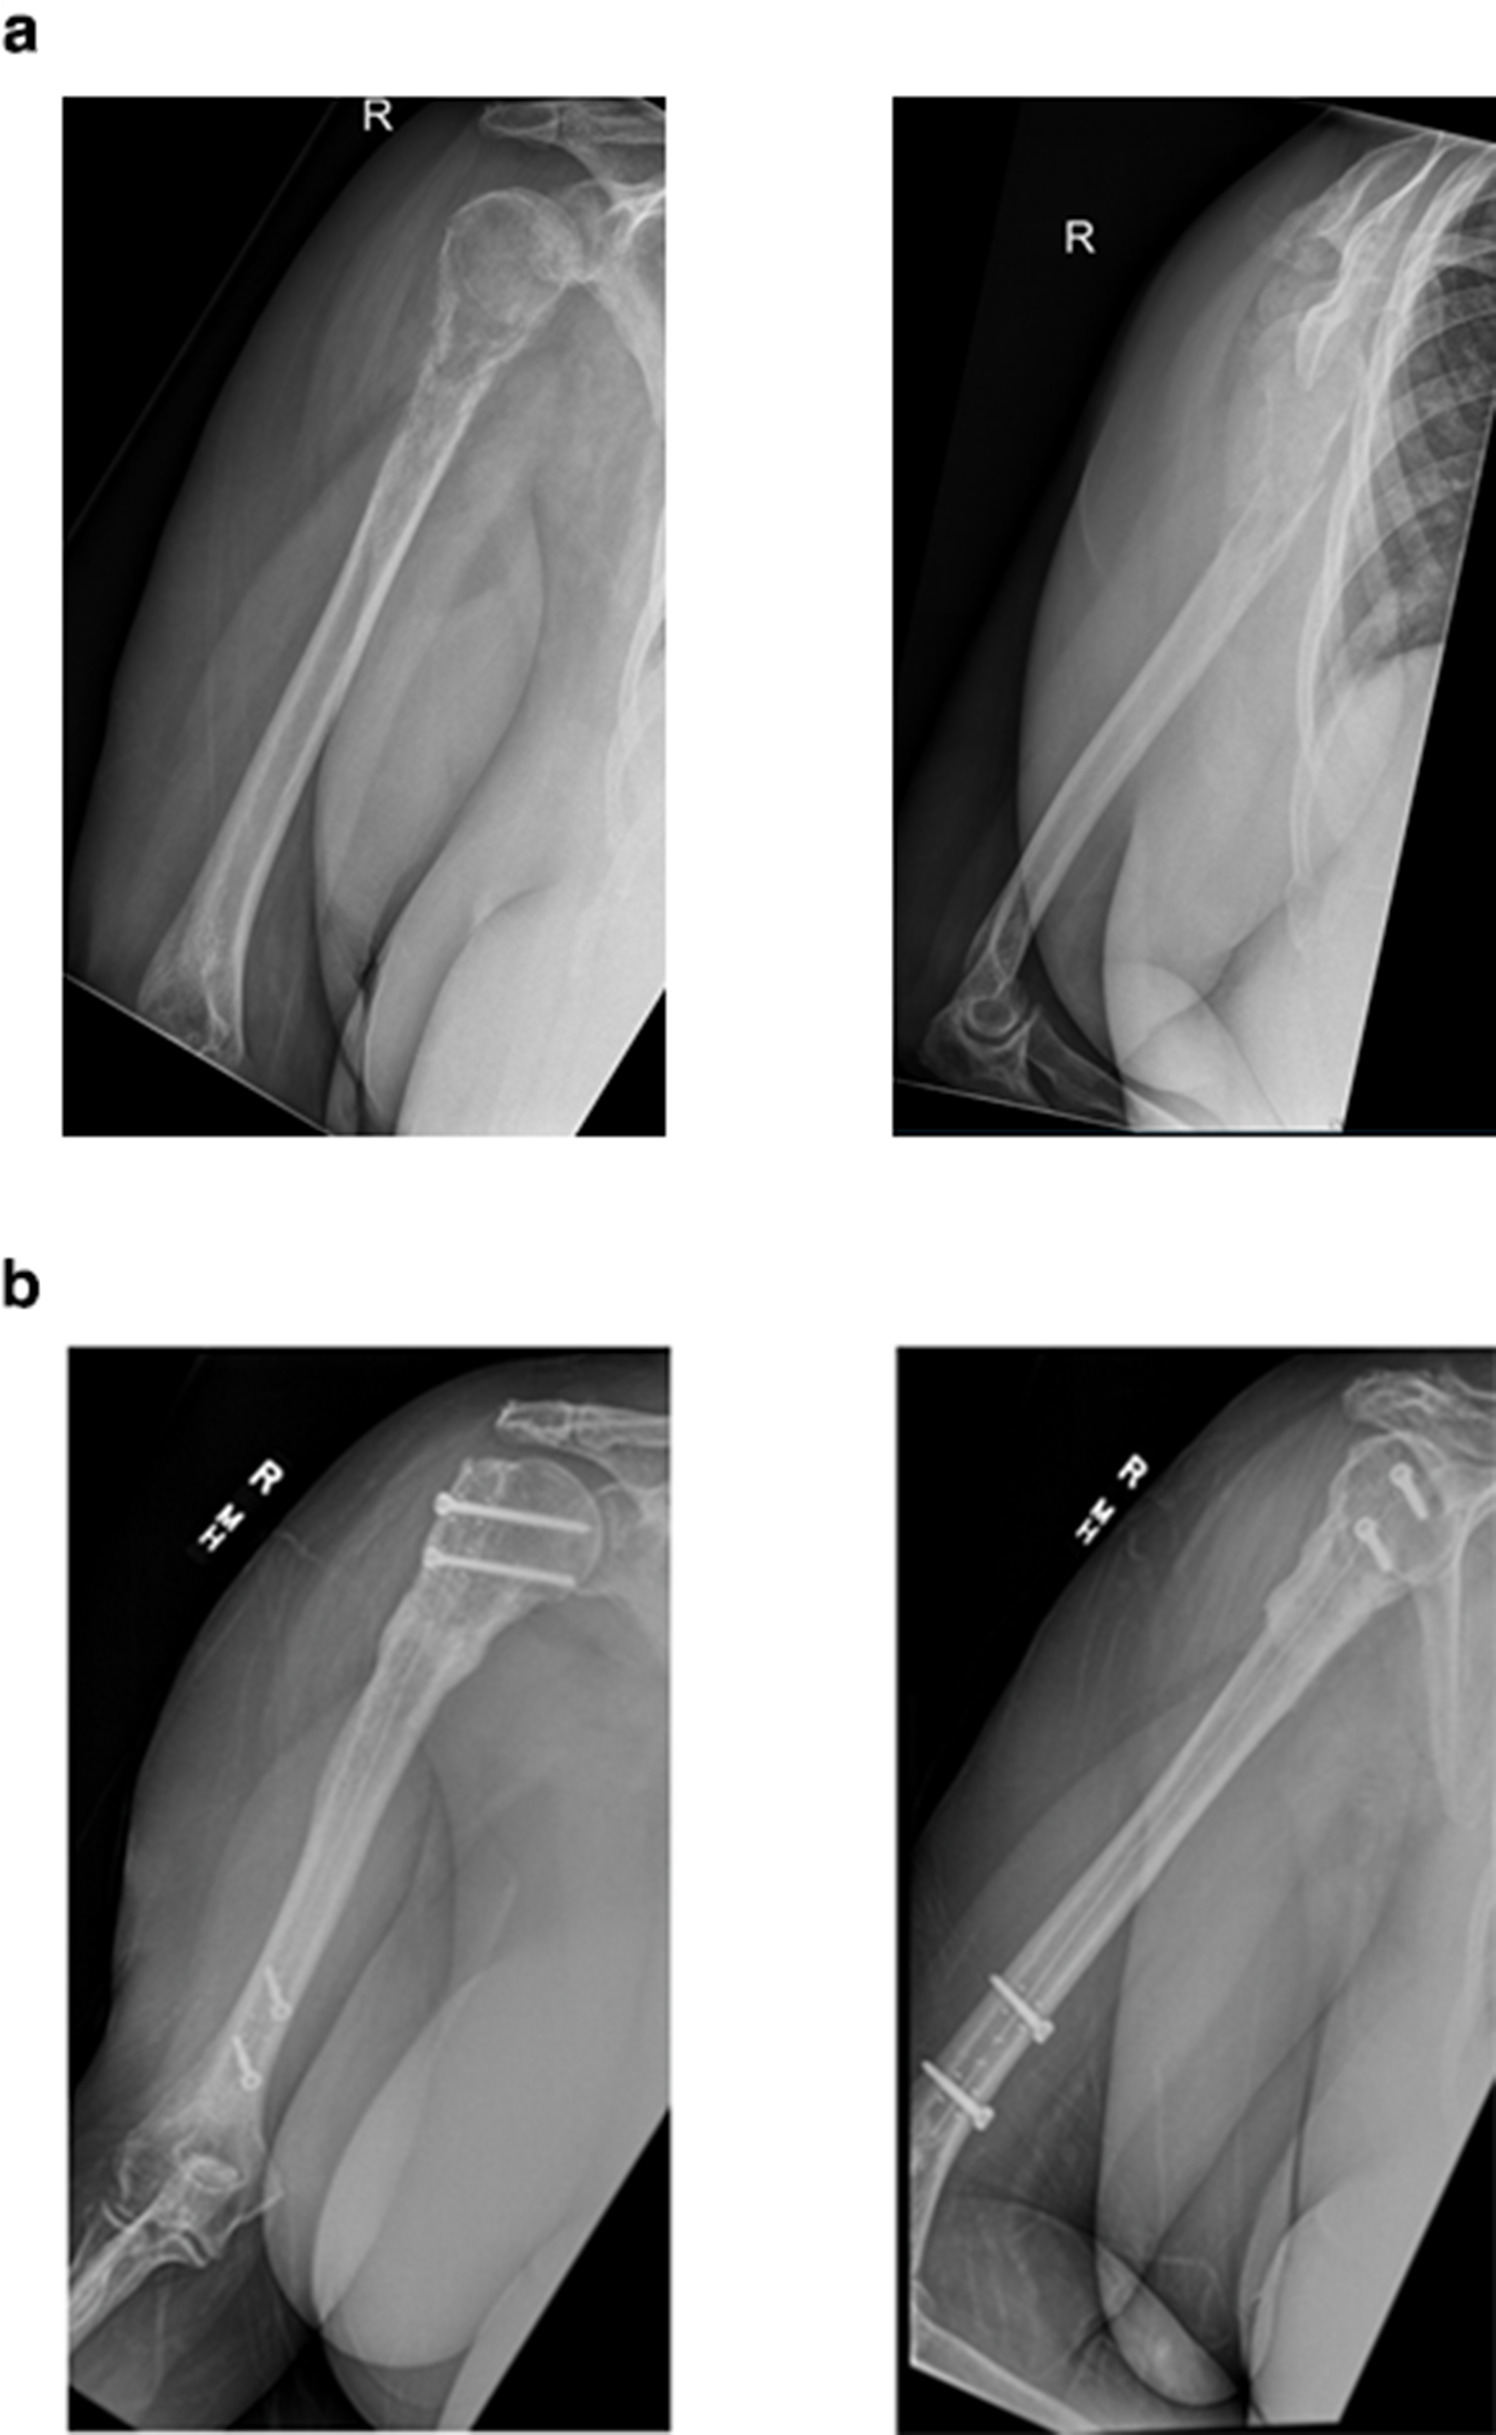 Fig. 2 
          a) Anteroposterior (AP) and lateral radiographs of the right humerus of a 66-year-old female with a pathological fracture lymphoma. b) AP and lateral radiographs of the healed right humerus at 11 months after intramedullary nail fixation with carbon fibre radiolucent implant, demonstrating its ability to allow for ongoing visualization of metastatic lesion location and healing of pathological fracture.
        